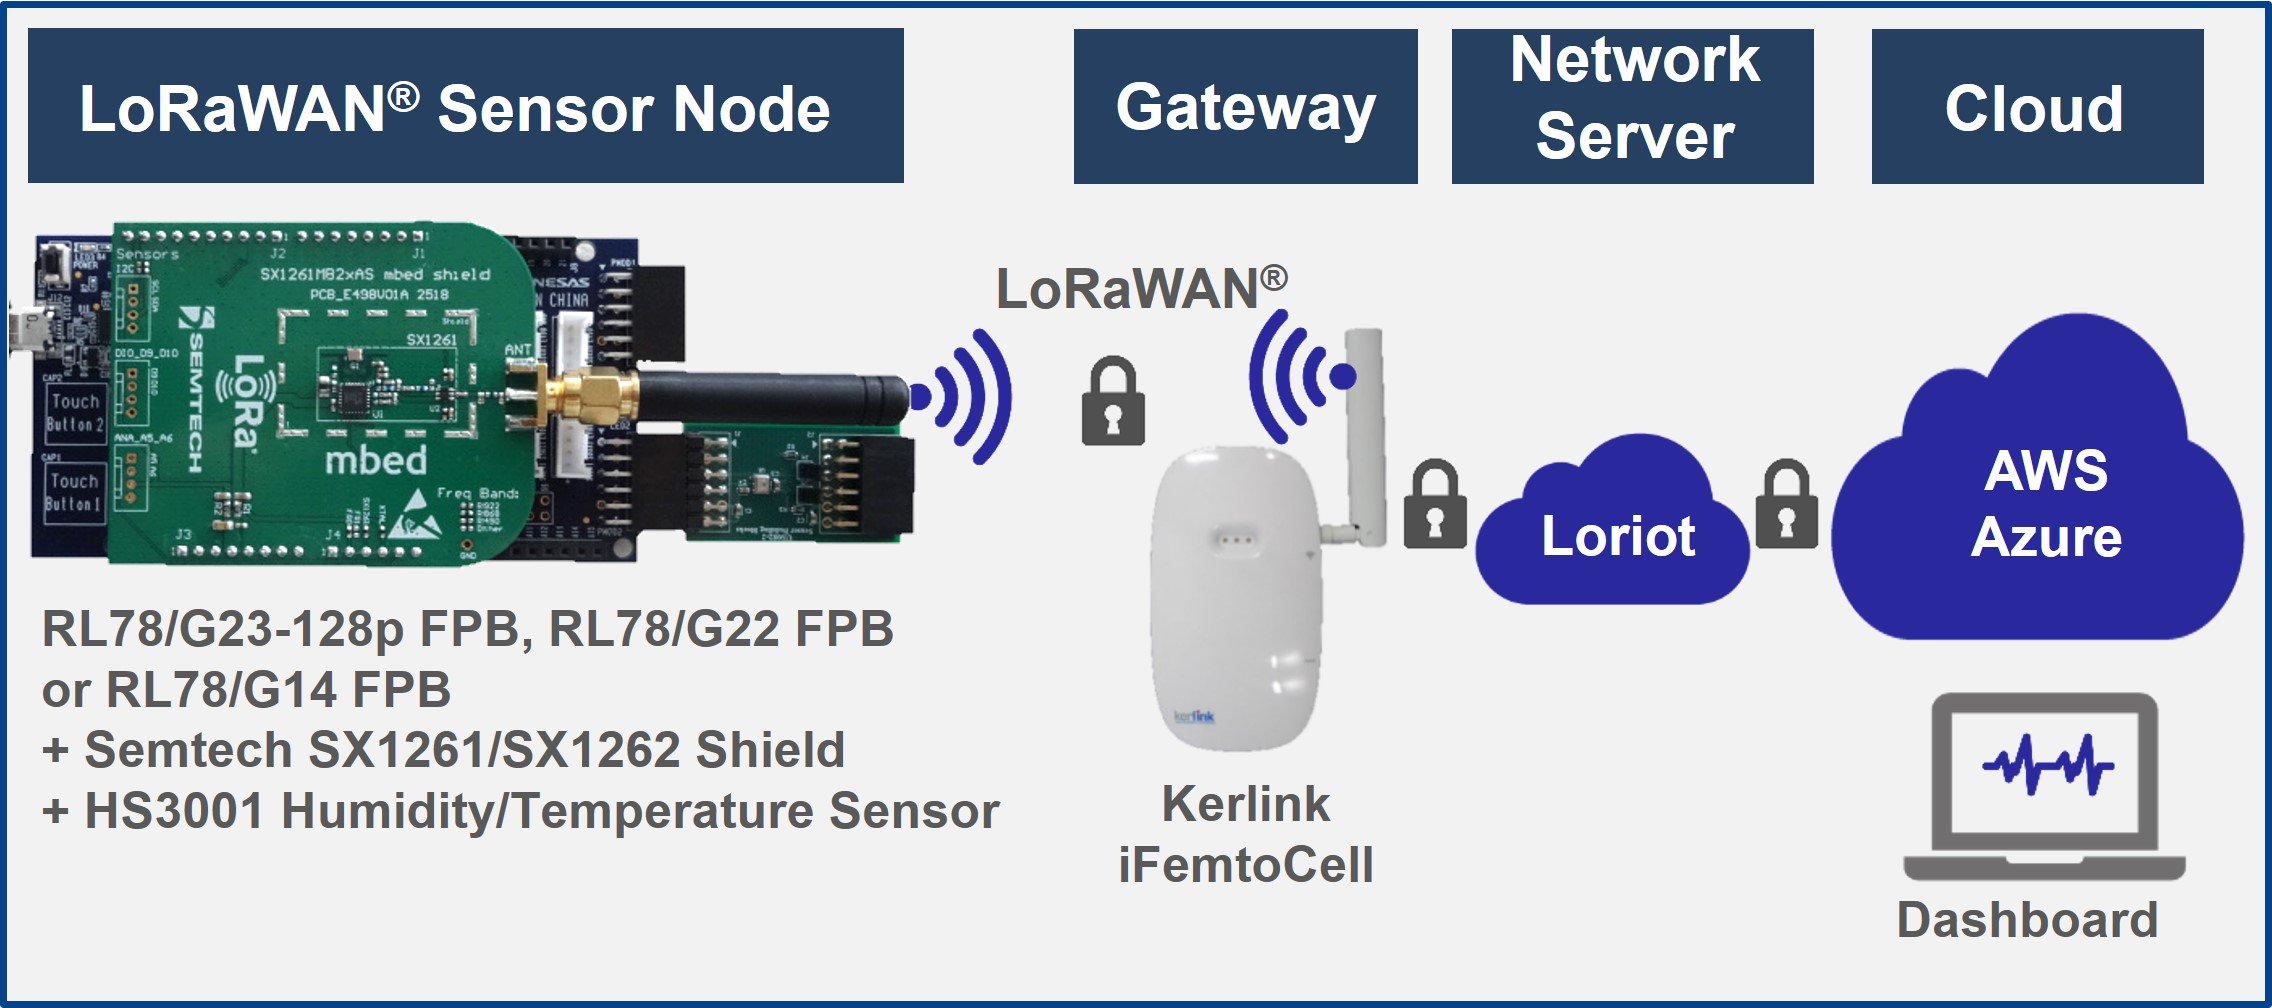 Visualize sensor data transmitted by the RL78 Sensor Node to the Cloud